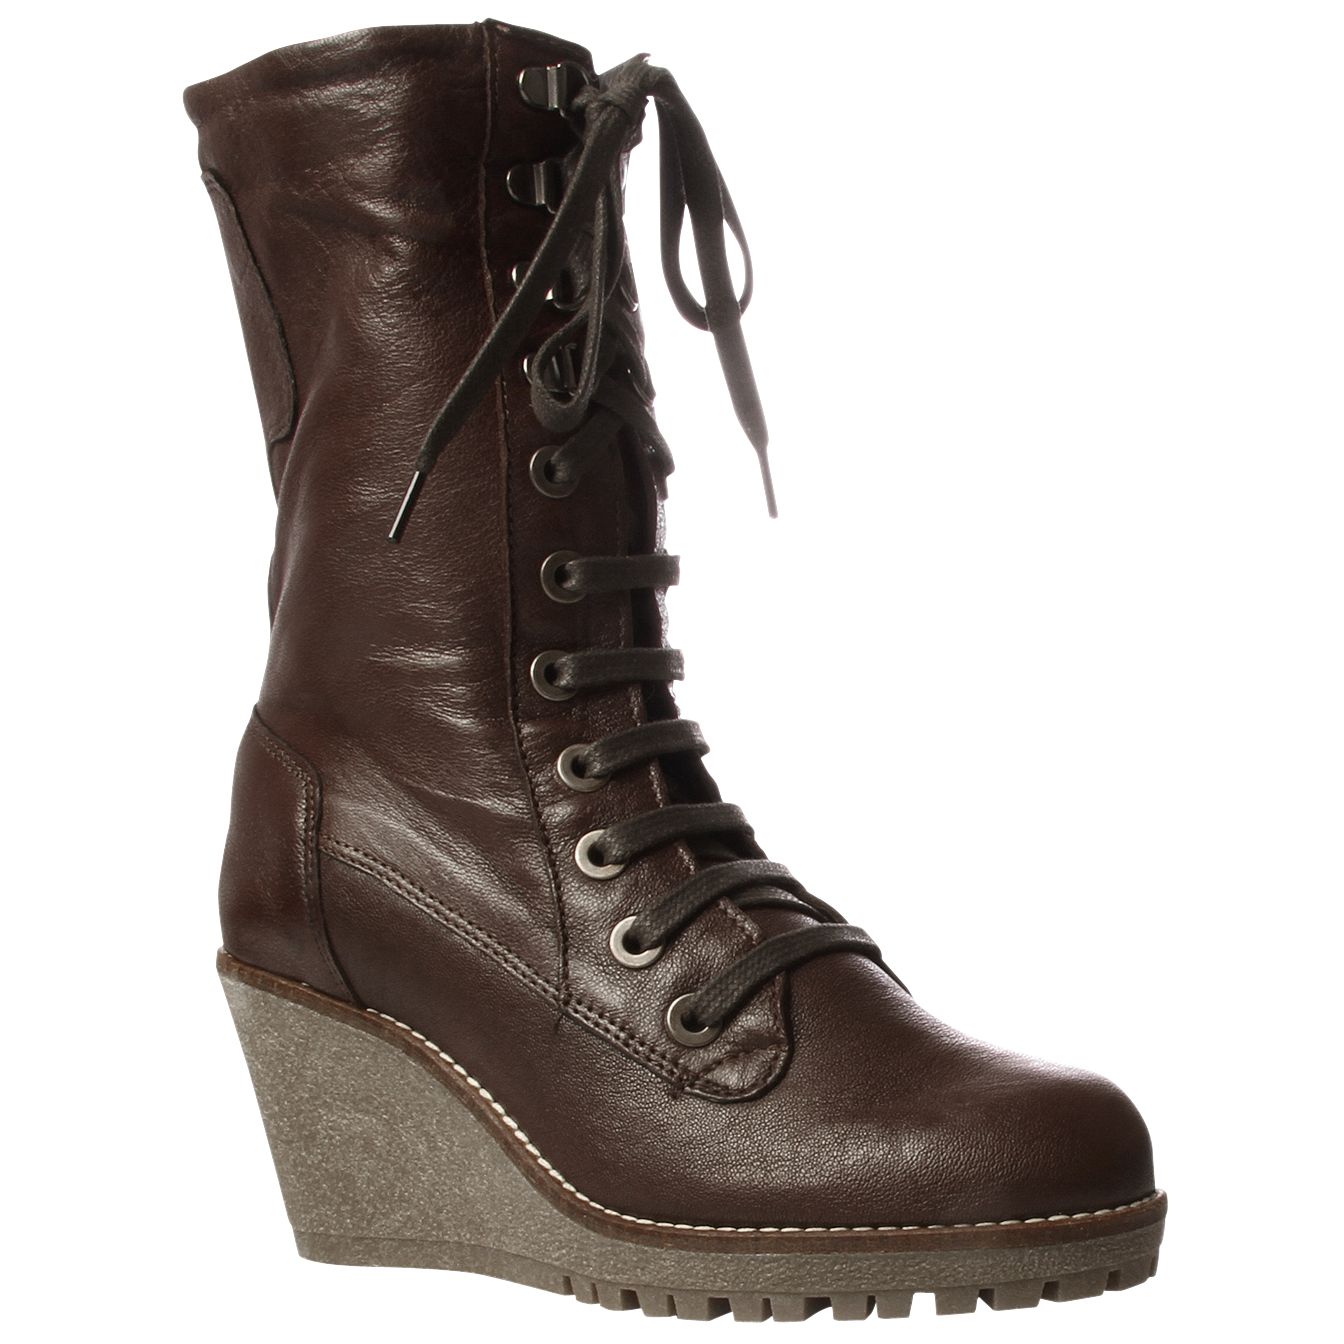 Carvela Military Wedge Calf Lace Up Boots, Brown at John Lewis